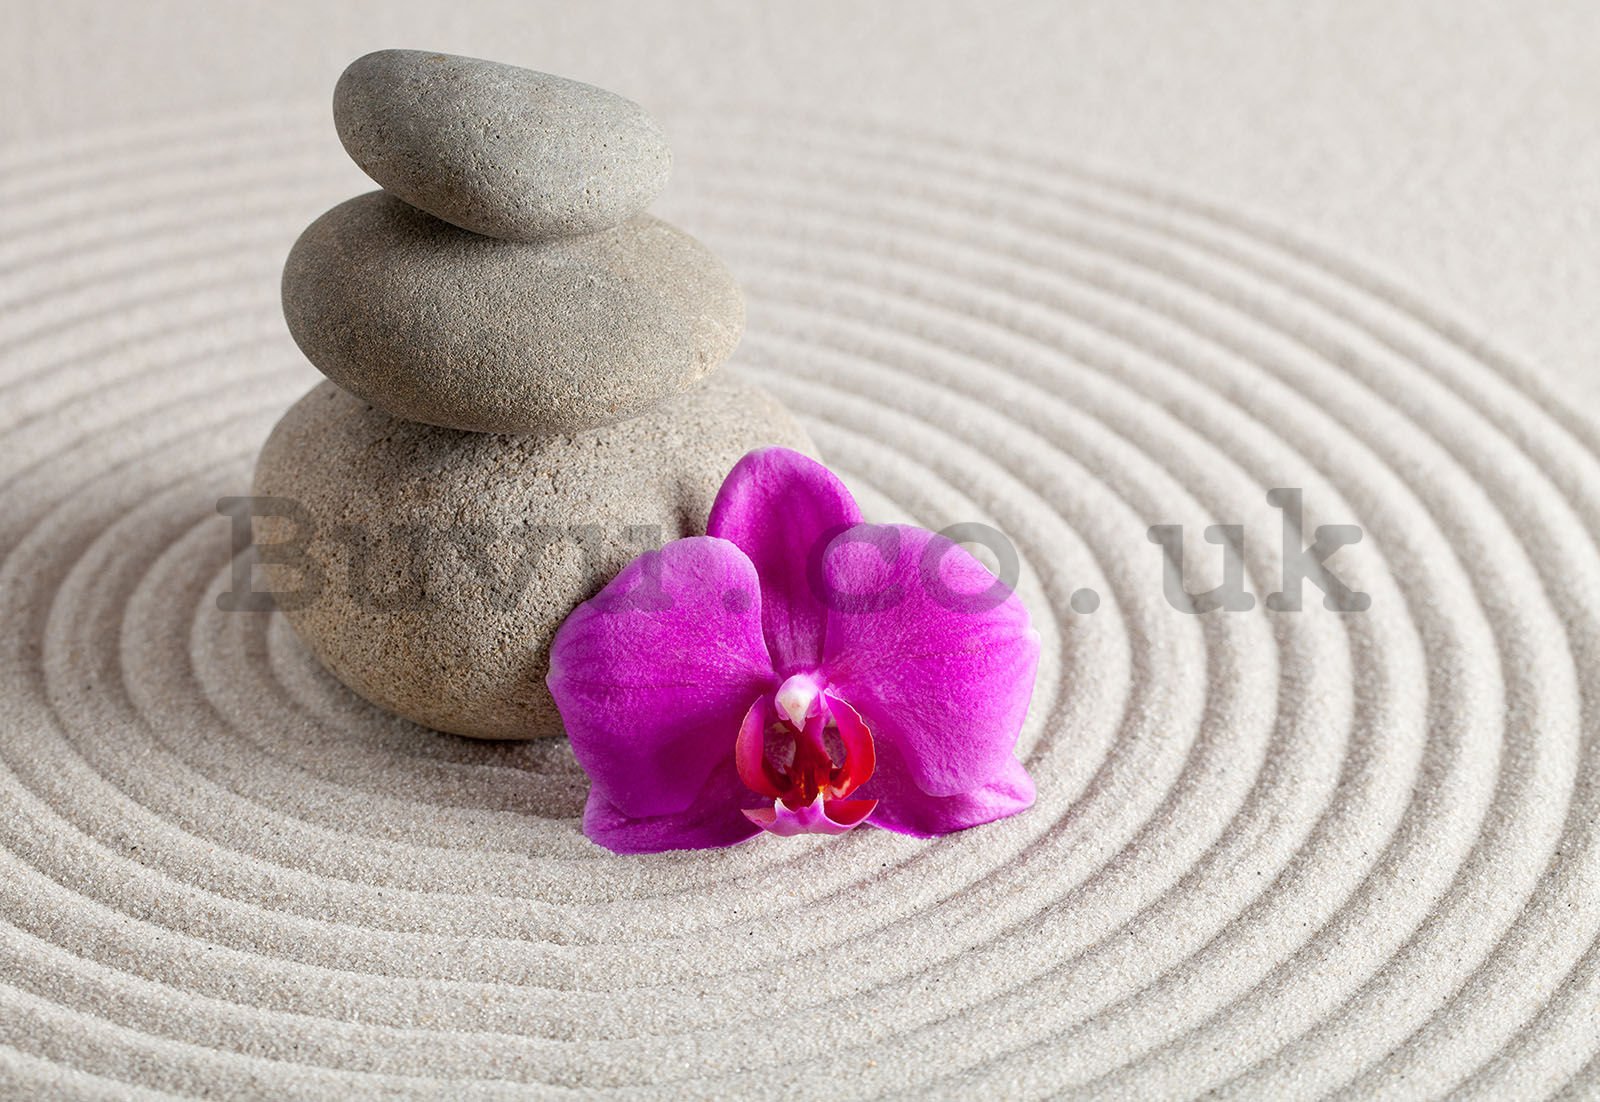 Wall mural vlies: Spa stones and orchid - 152,5x104 cm